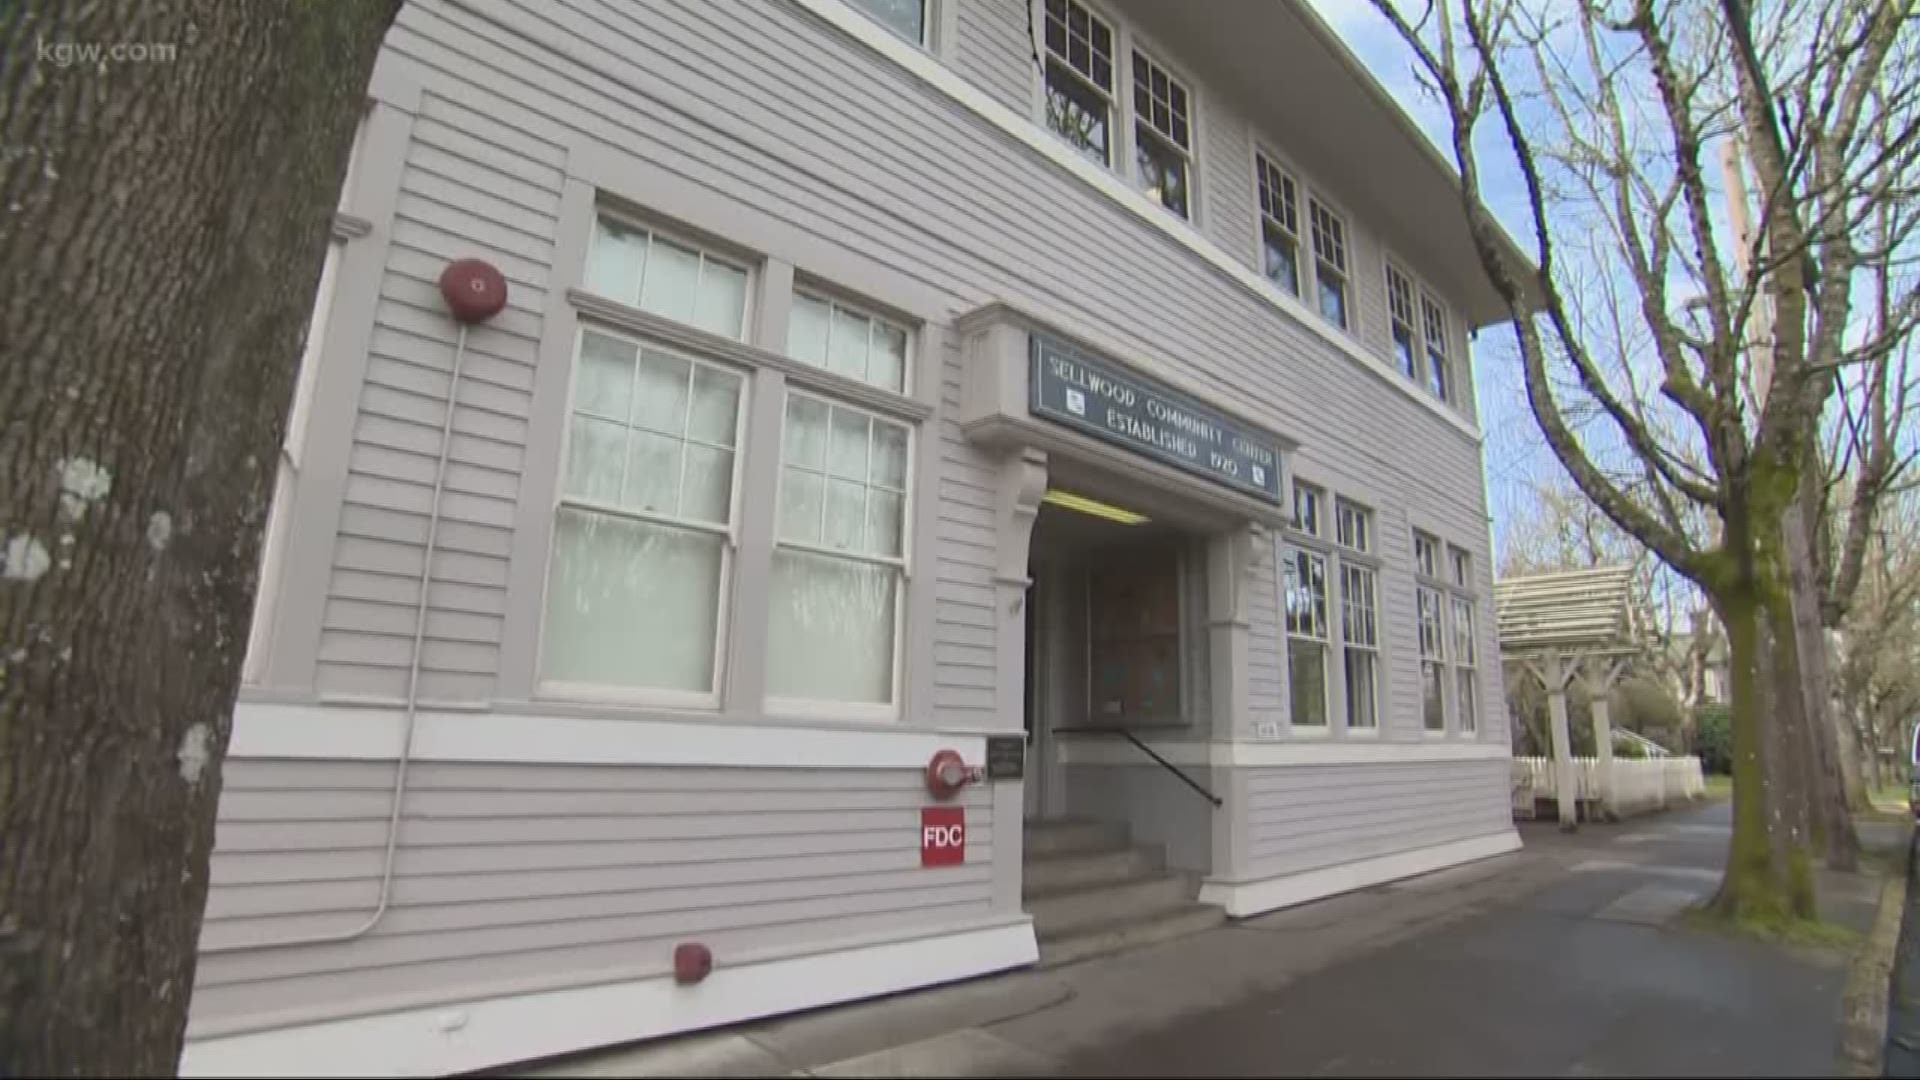 Sellwood Community Center reopens after community saves it from closing